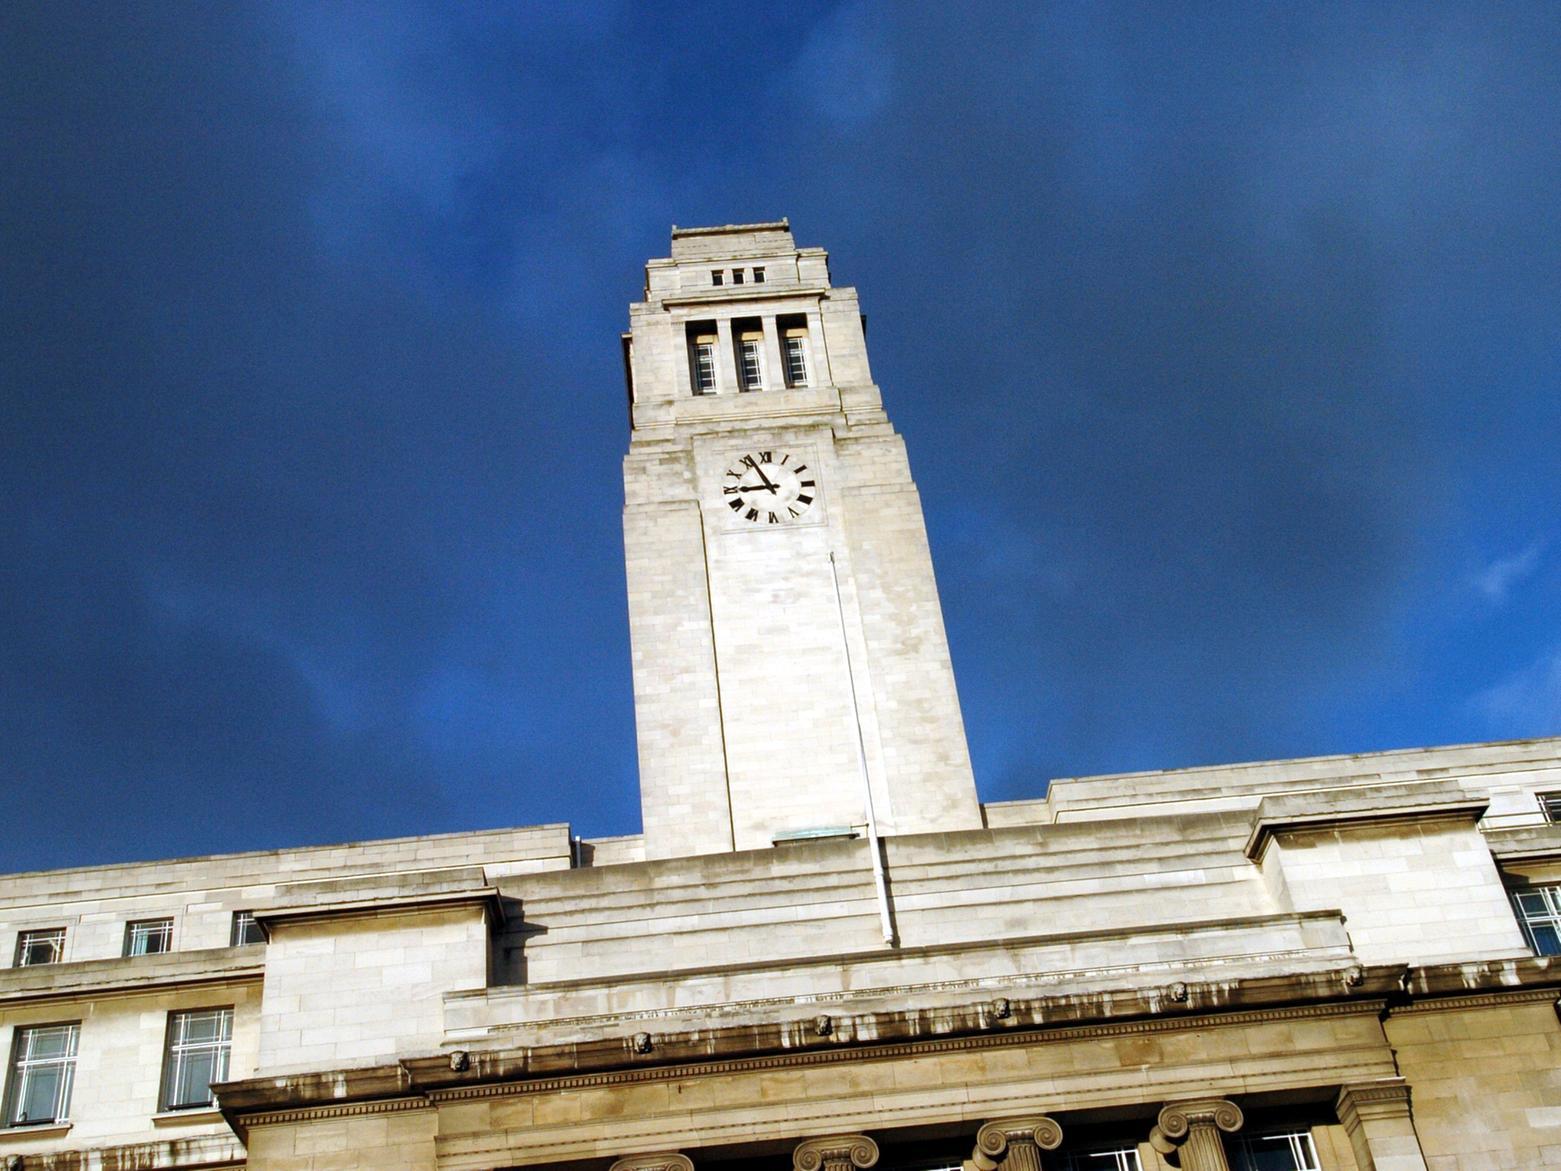 The Parkinson Building, for many, is a symbol of Leeds University itself. Started in 1938 following a 200,000 donation from former student, Frank Parkinson who made his fortune in the manufacture of electrical goods.